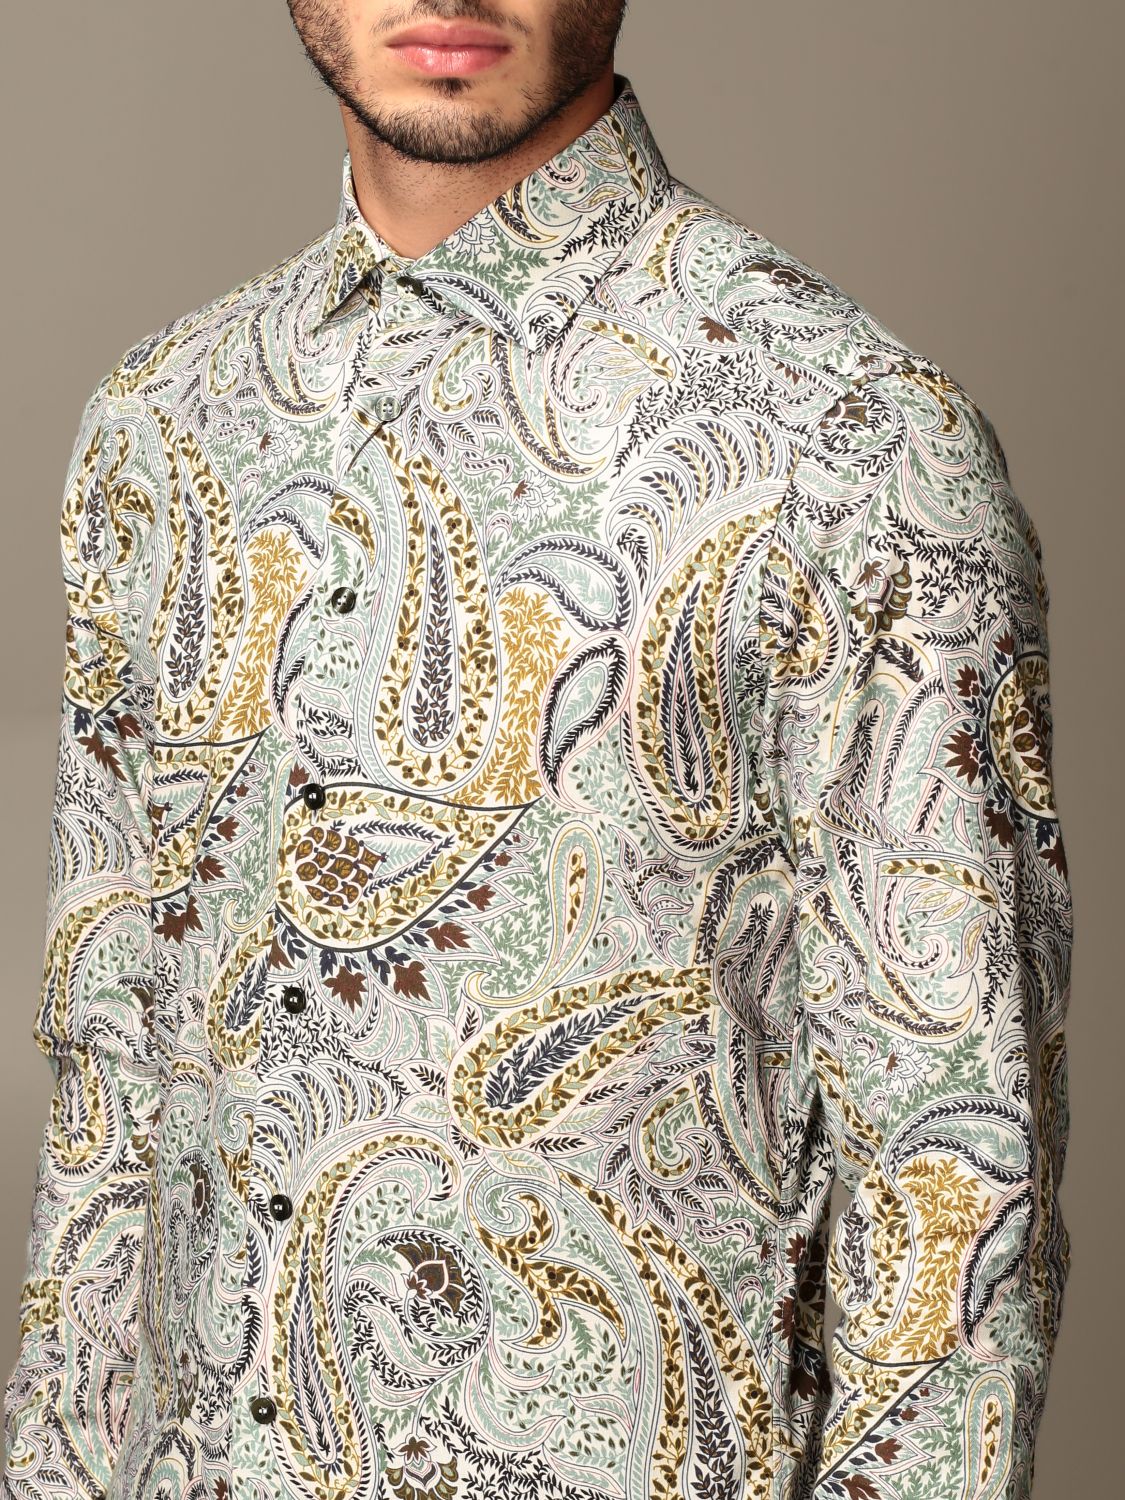 Etro shirt in paisley cotton with French collar